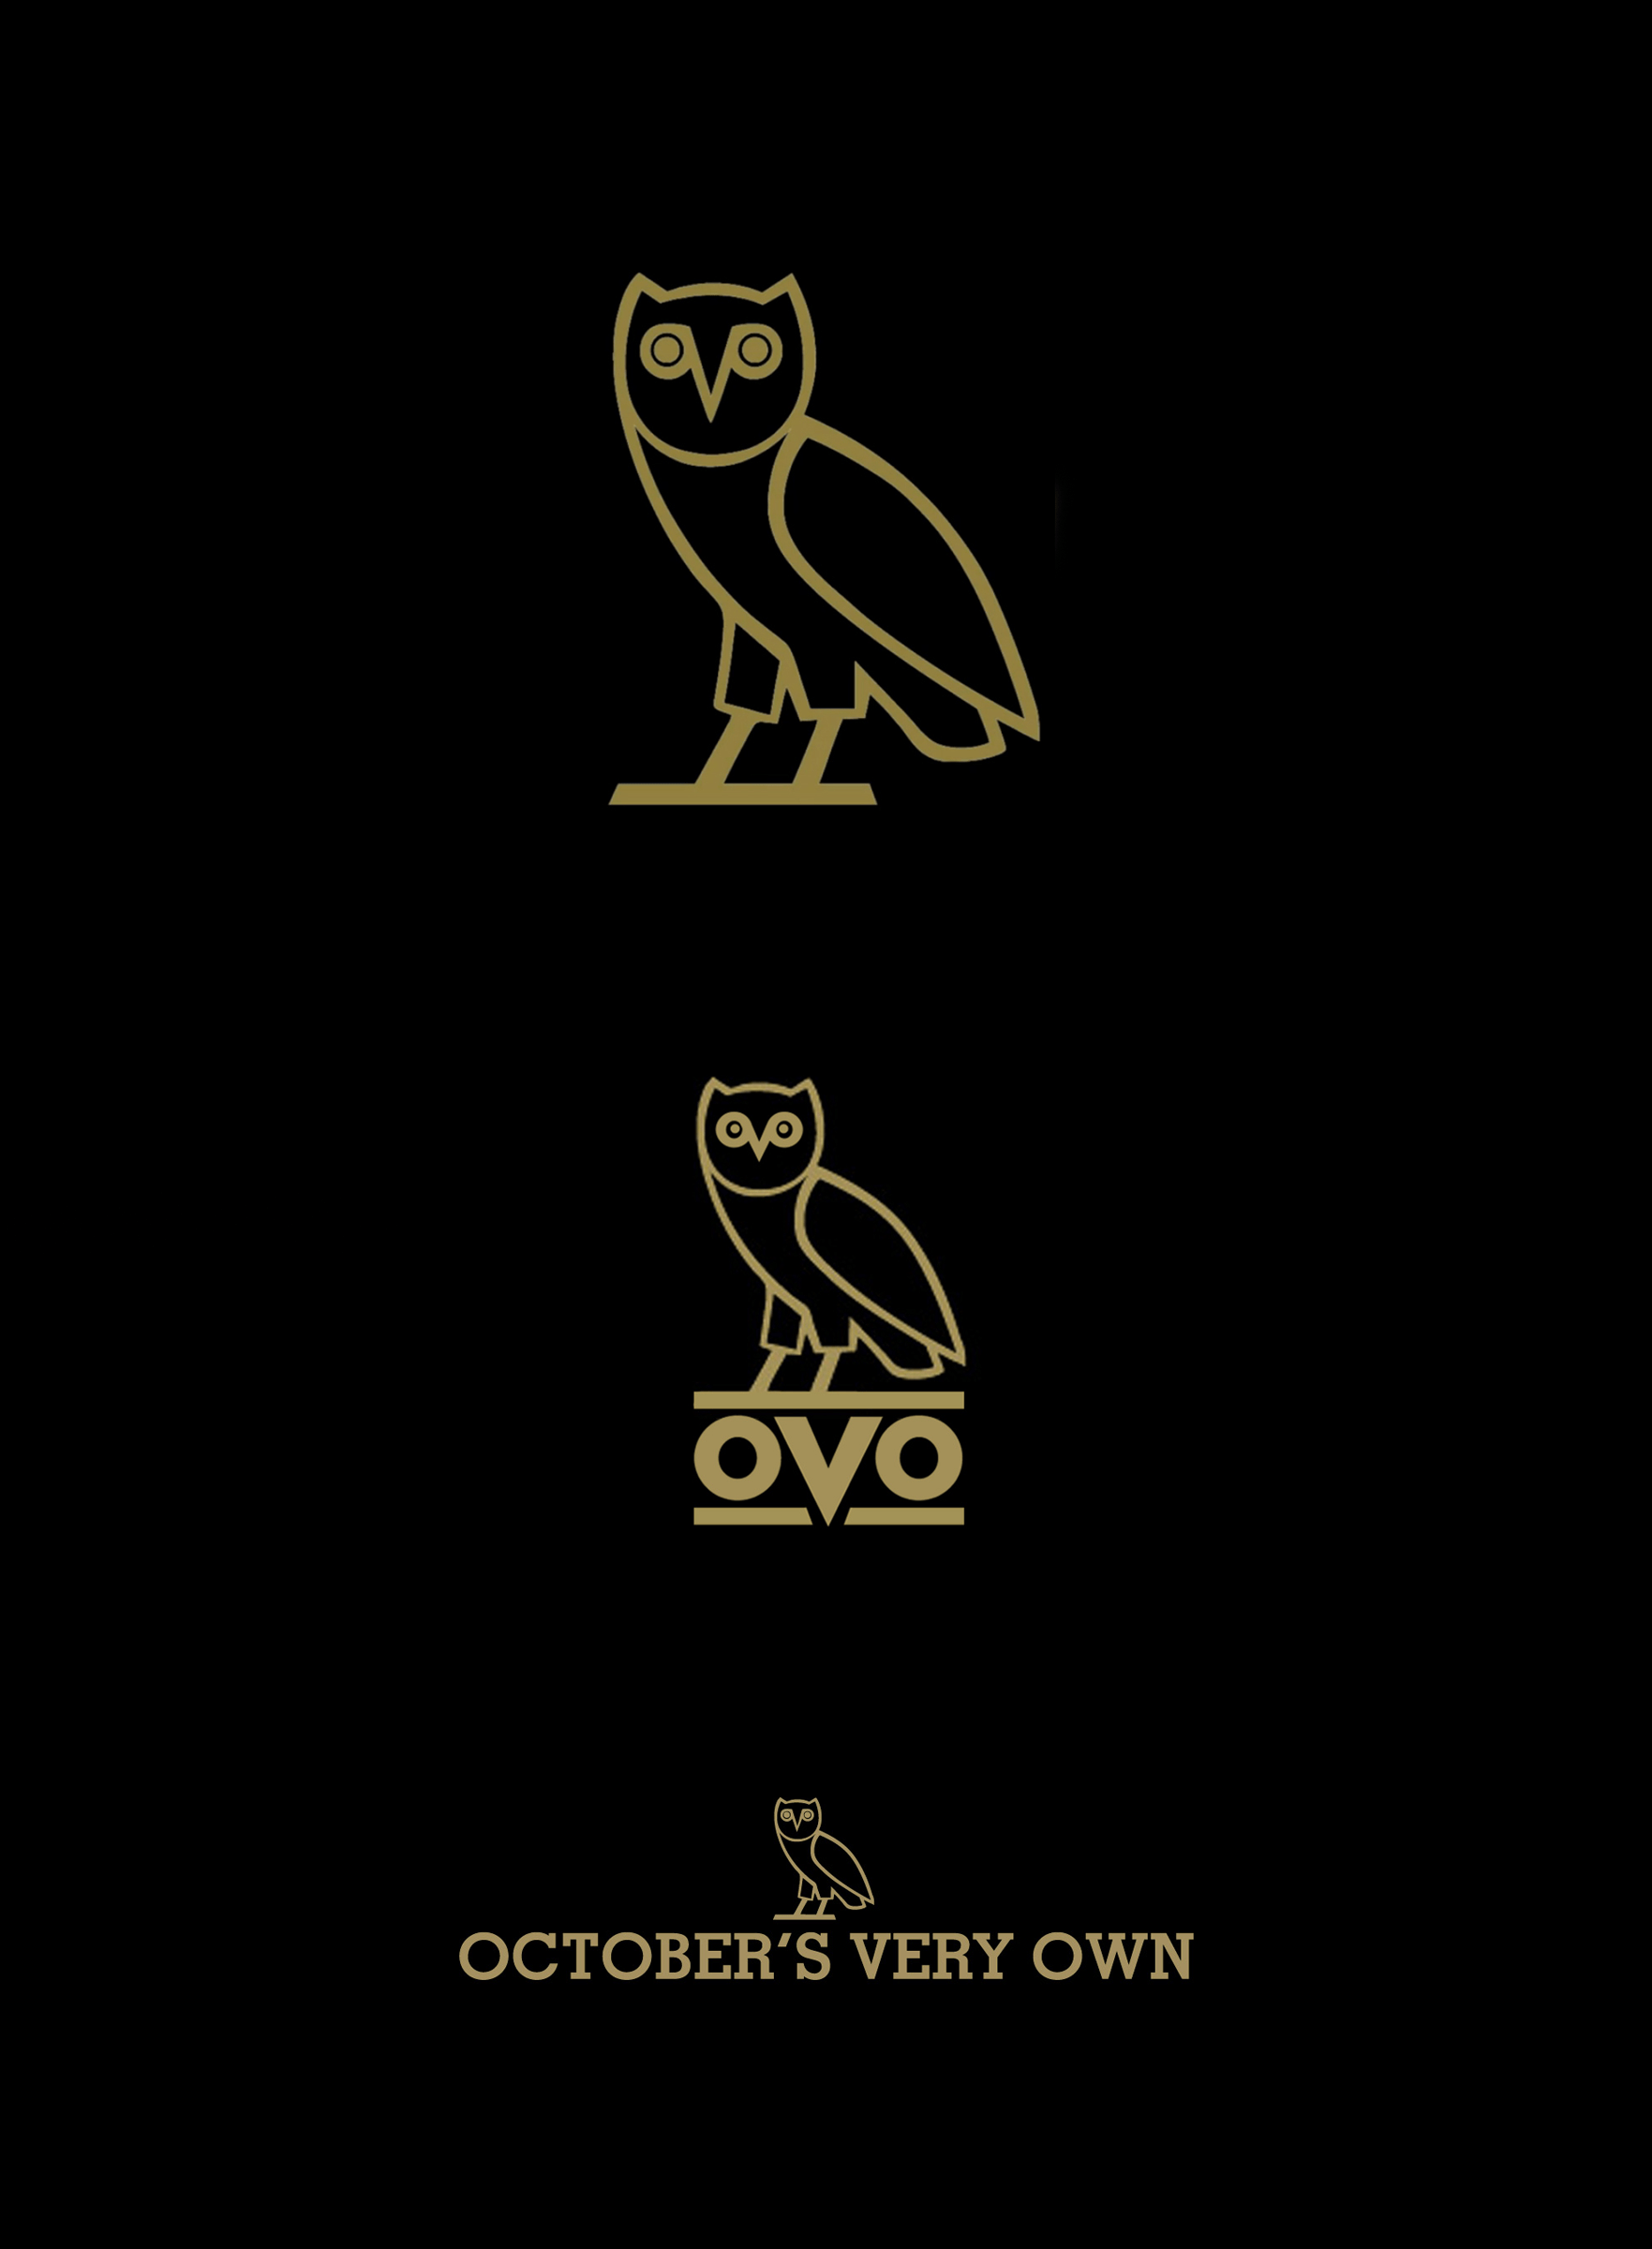 Ovo Logo - OVO logo and wordmark for Drake's made in Canada clothing line ...